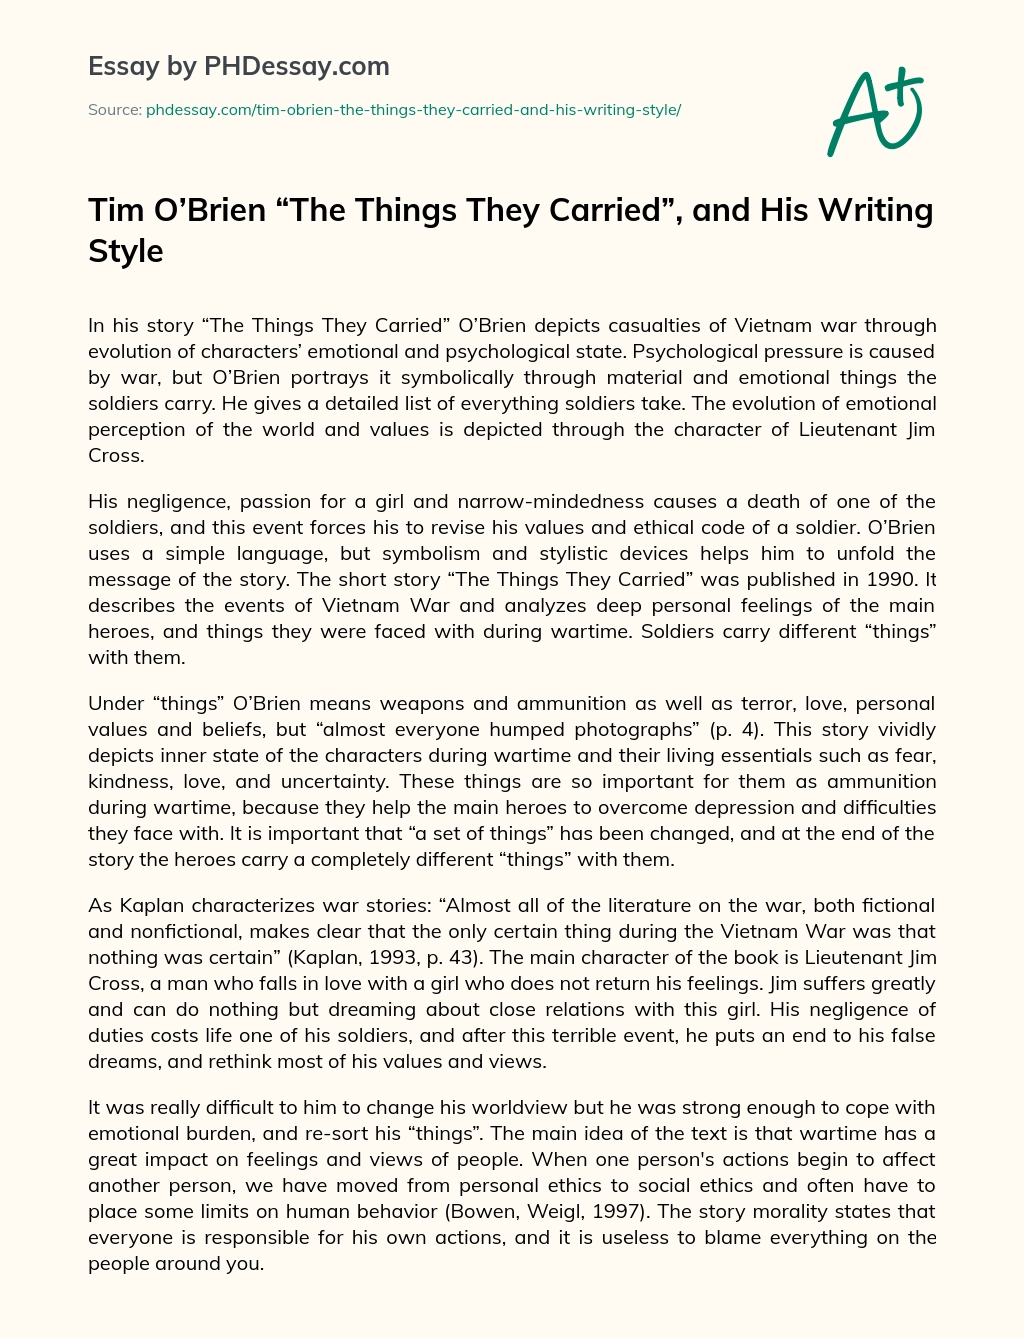 Tim O’Brien “The Things They Carried”, and His Writing Style essay